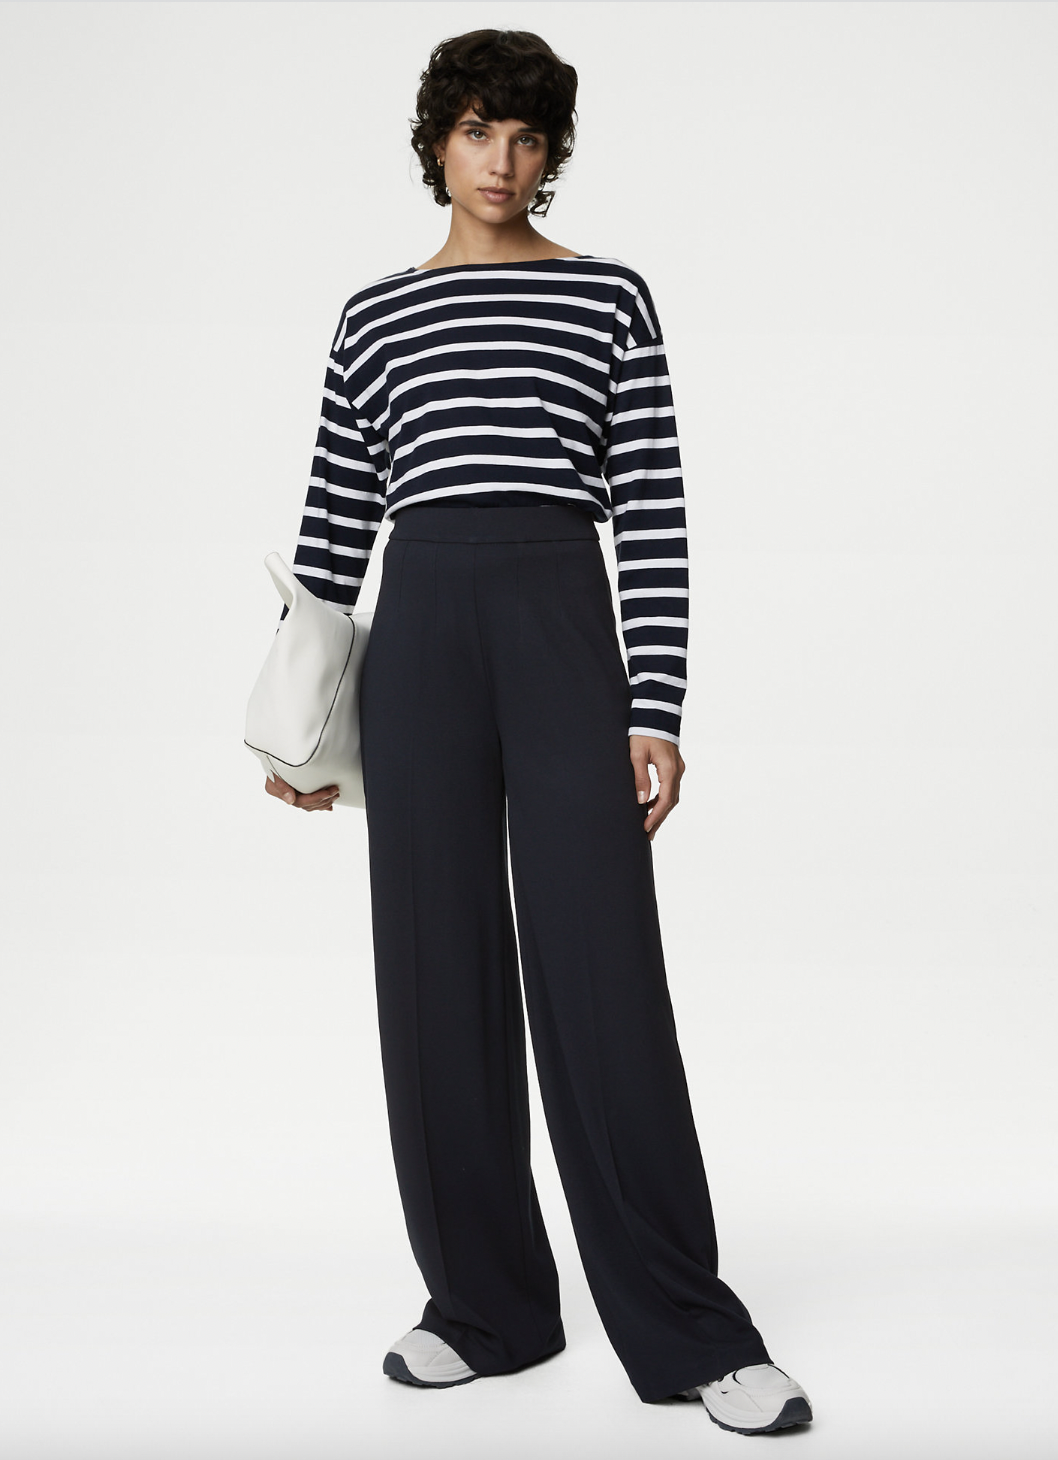 Affordable, versatile and universally flattering - these trousers are a wardrobe must-have. (Marks & Spencer)